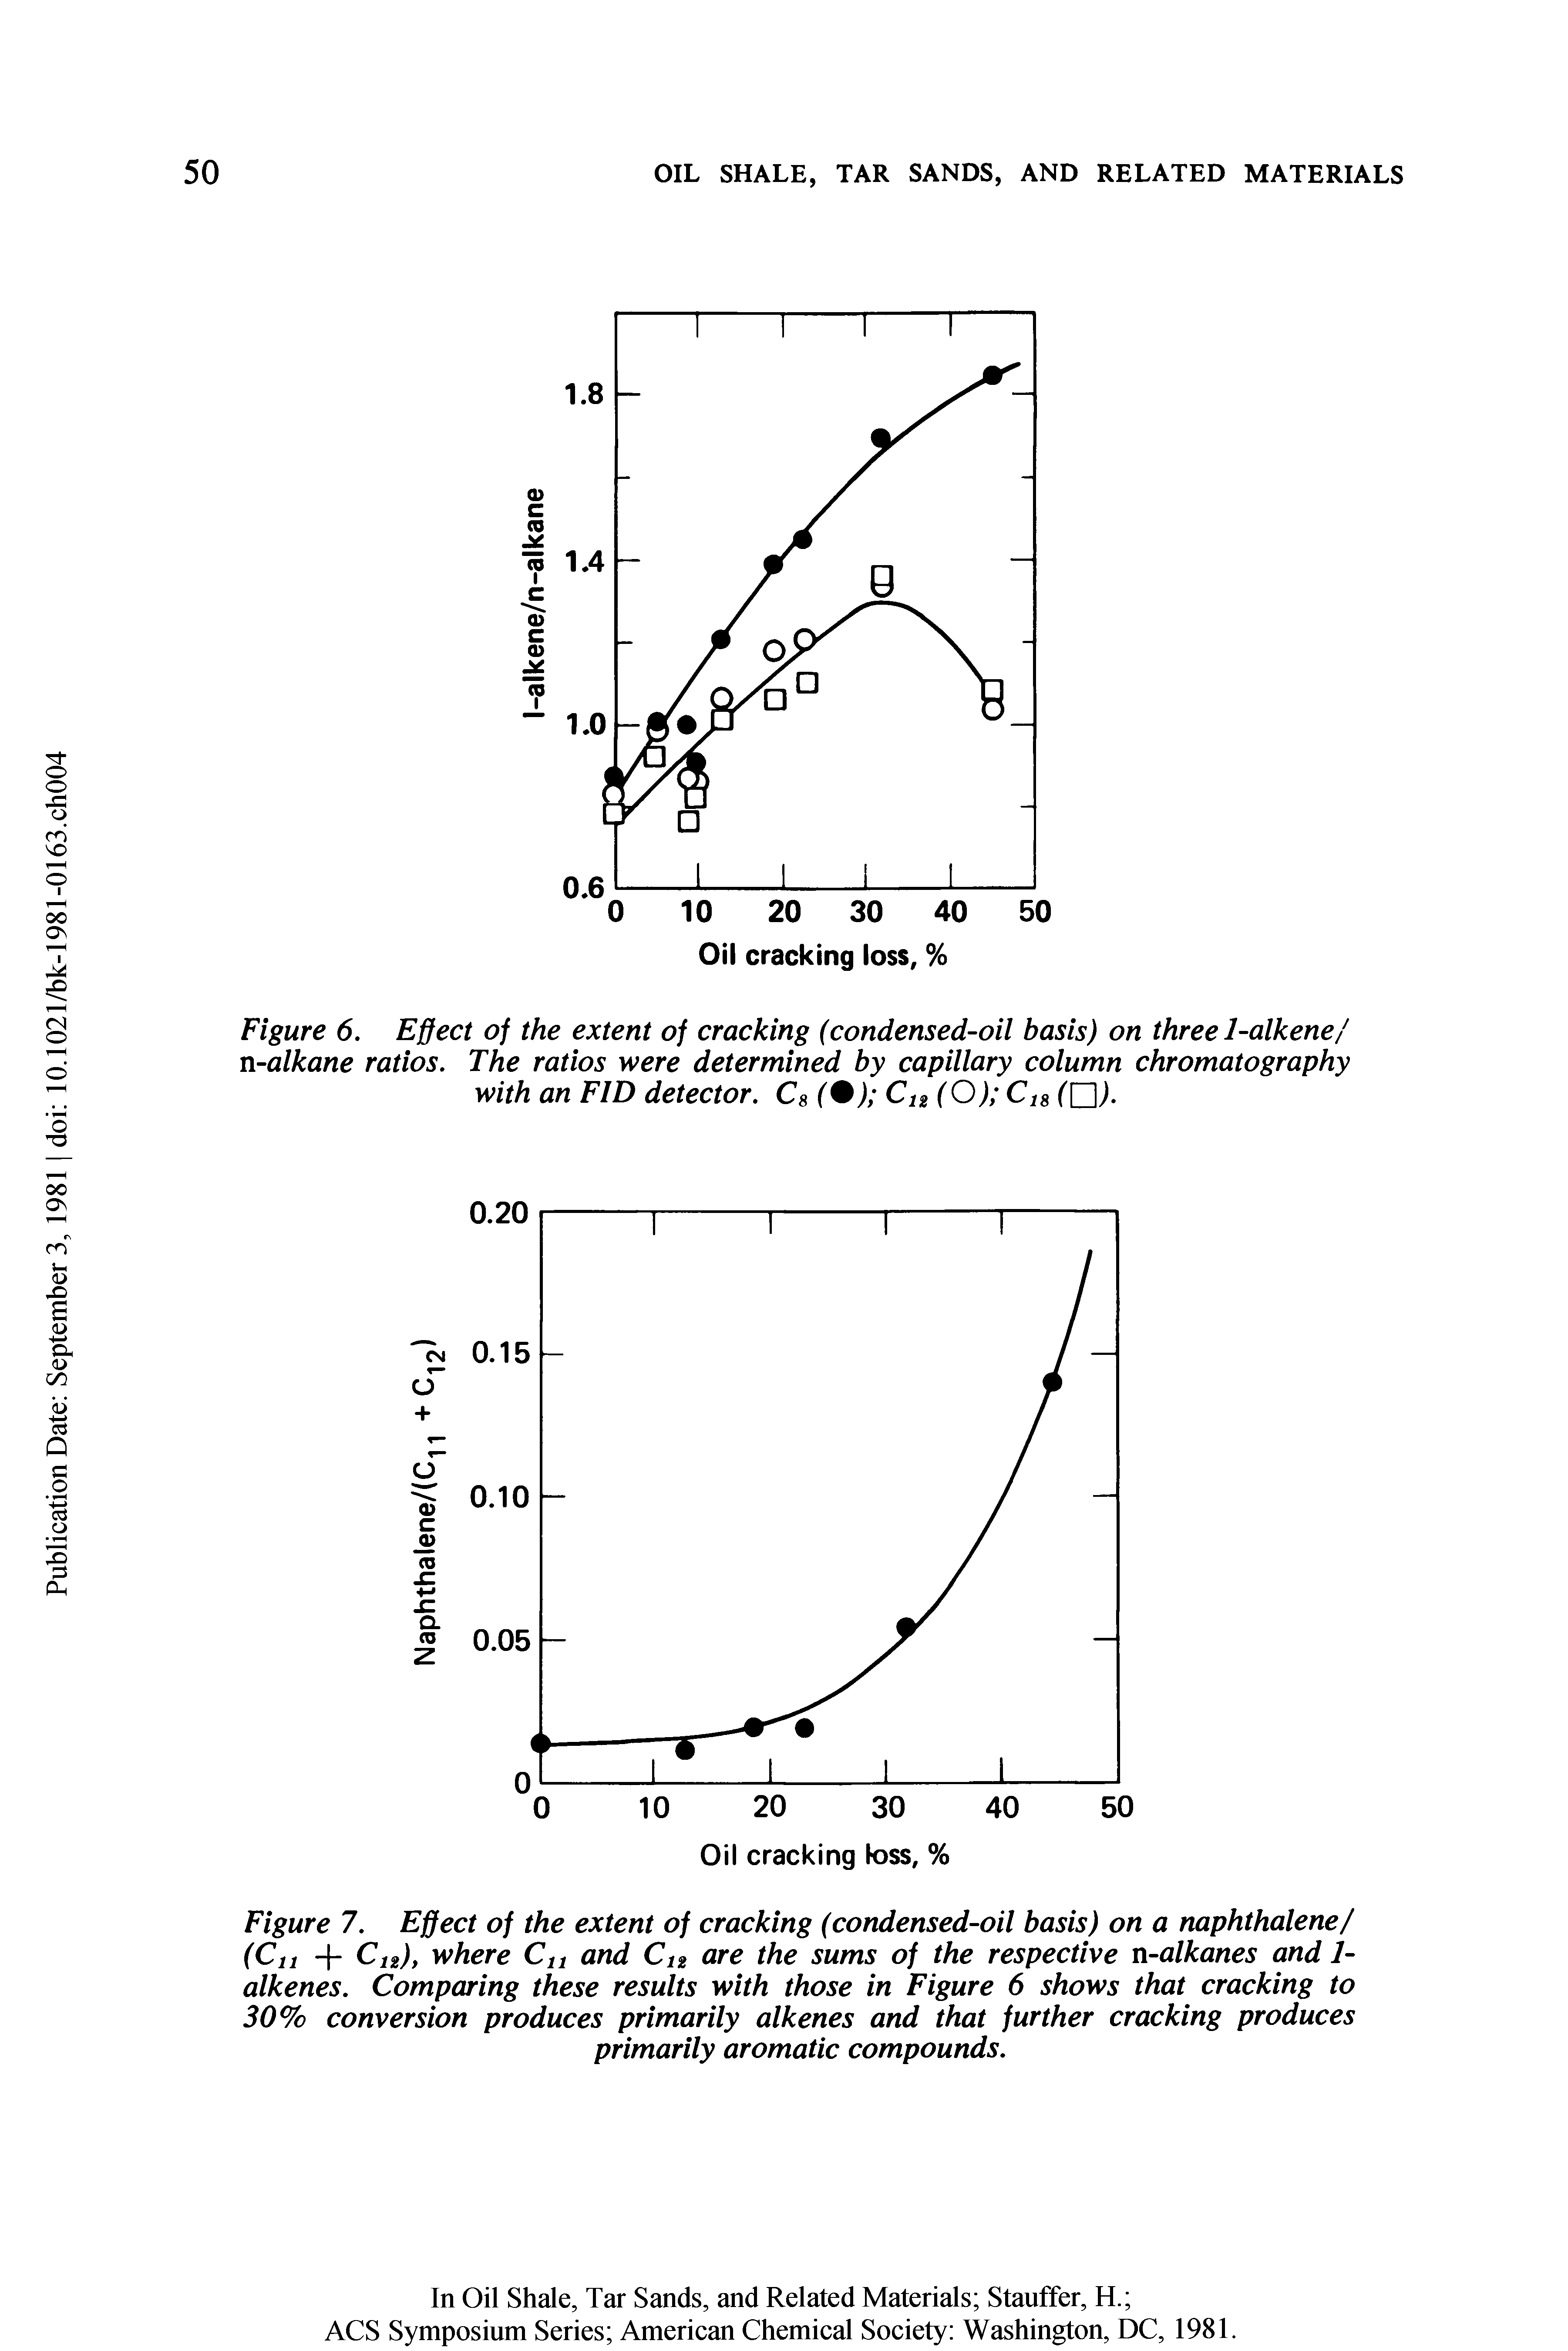 Figure 6. Effect of the extent of cracking (condensed-oil basis) on three 1-alkene/ n-alkane ratios. The ratios were determined by capillary column chromatography with an FID detector. C8 ) C12 (O) C18 ([J).